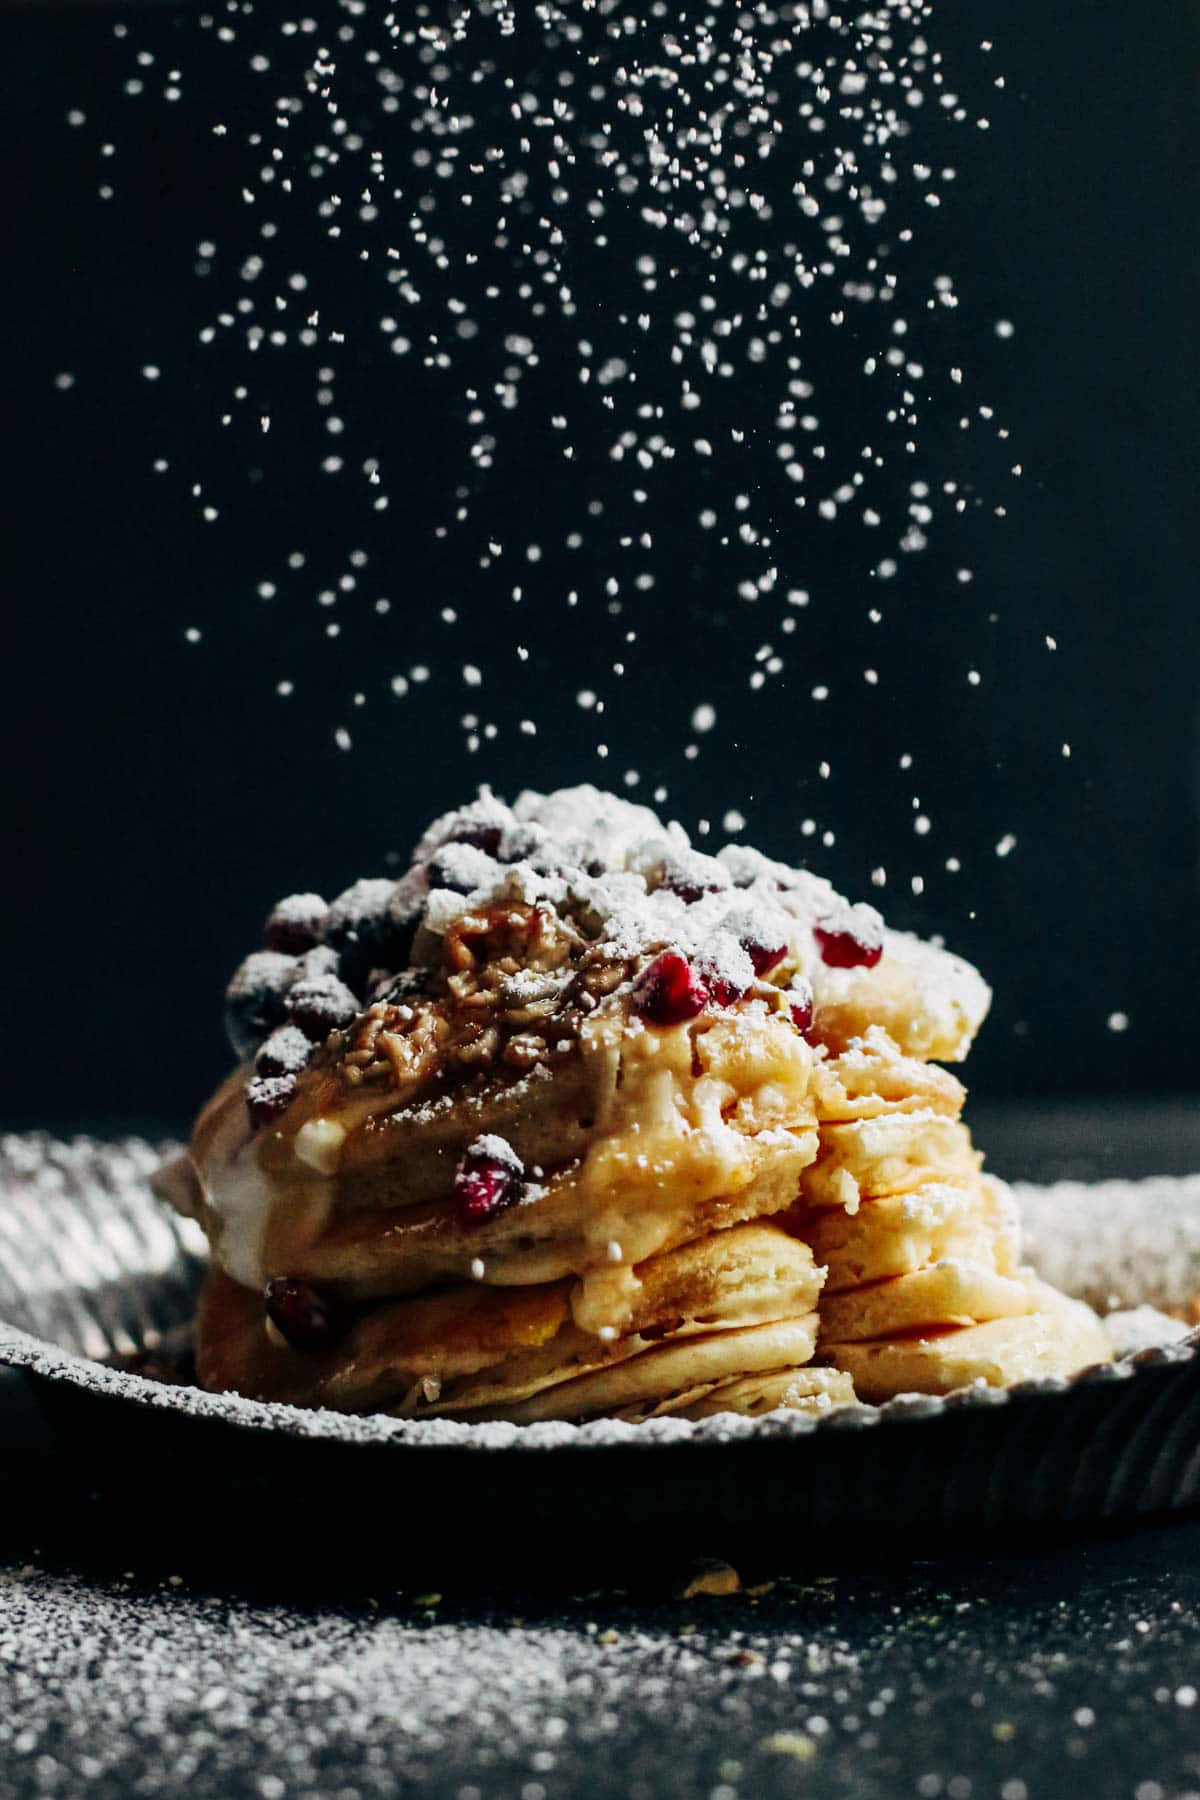 Indulge in Delicious Dessert with an iPhone Wallpaper